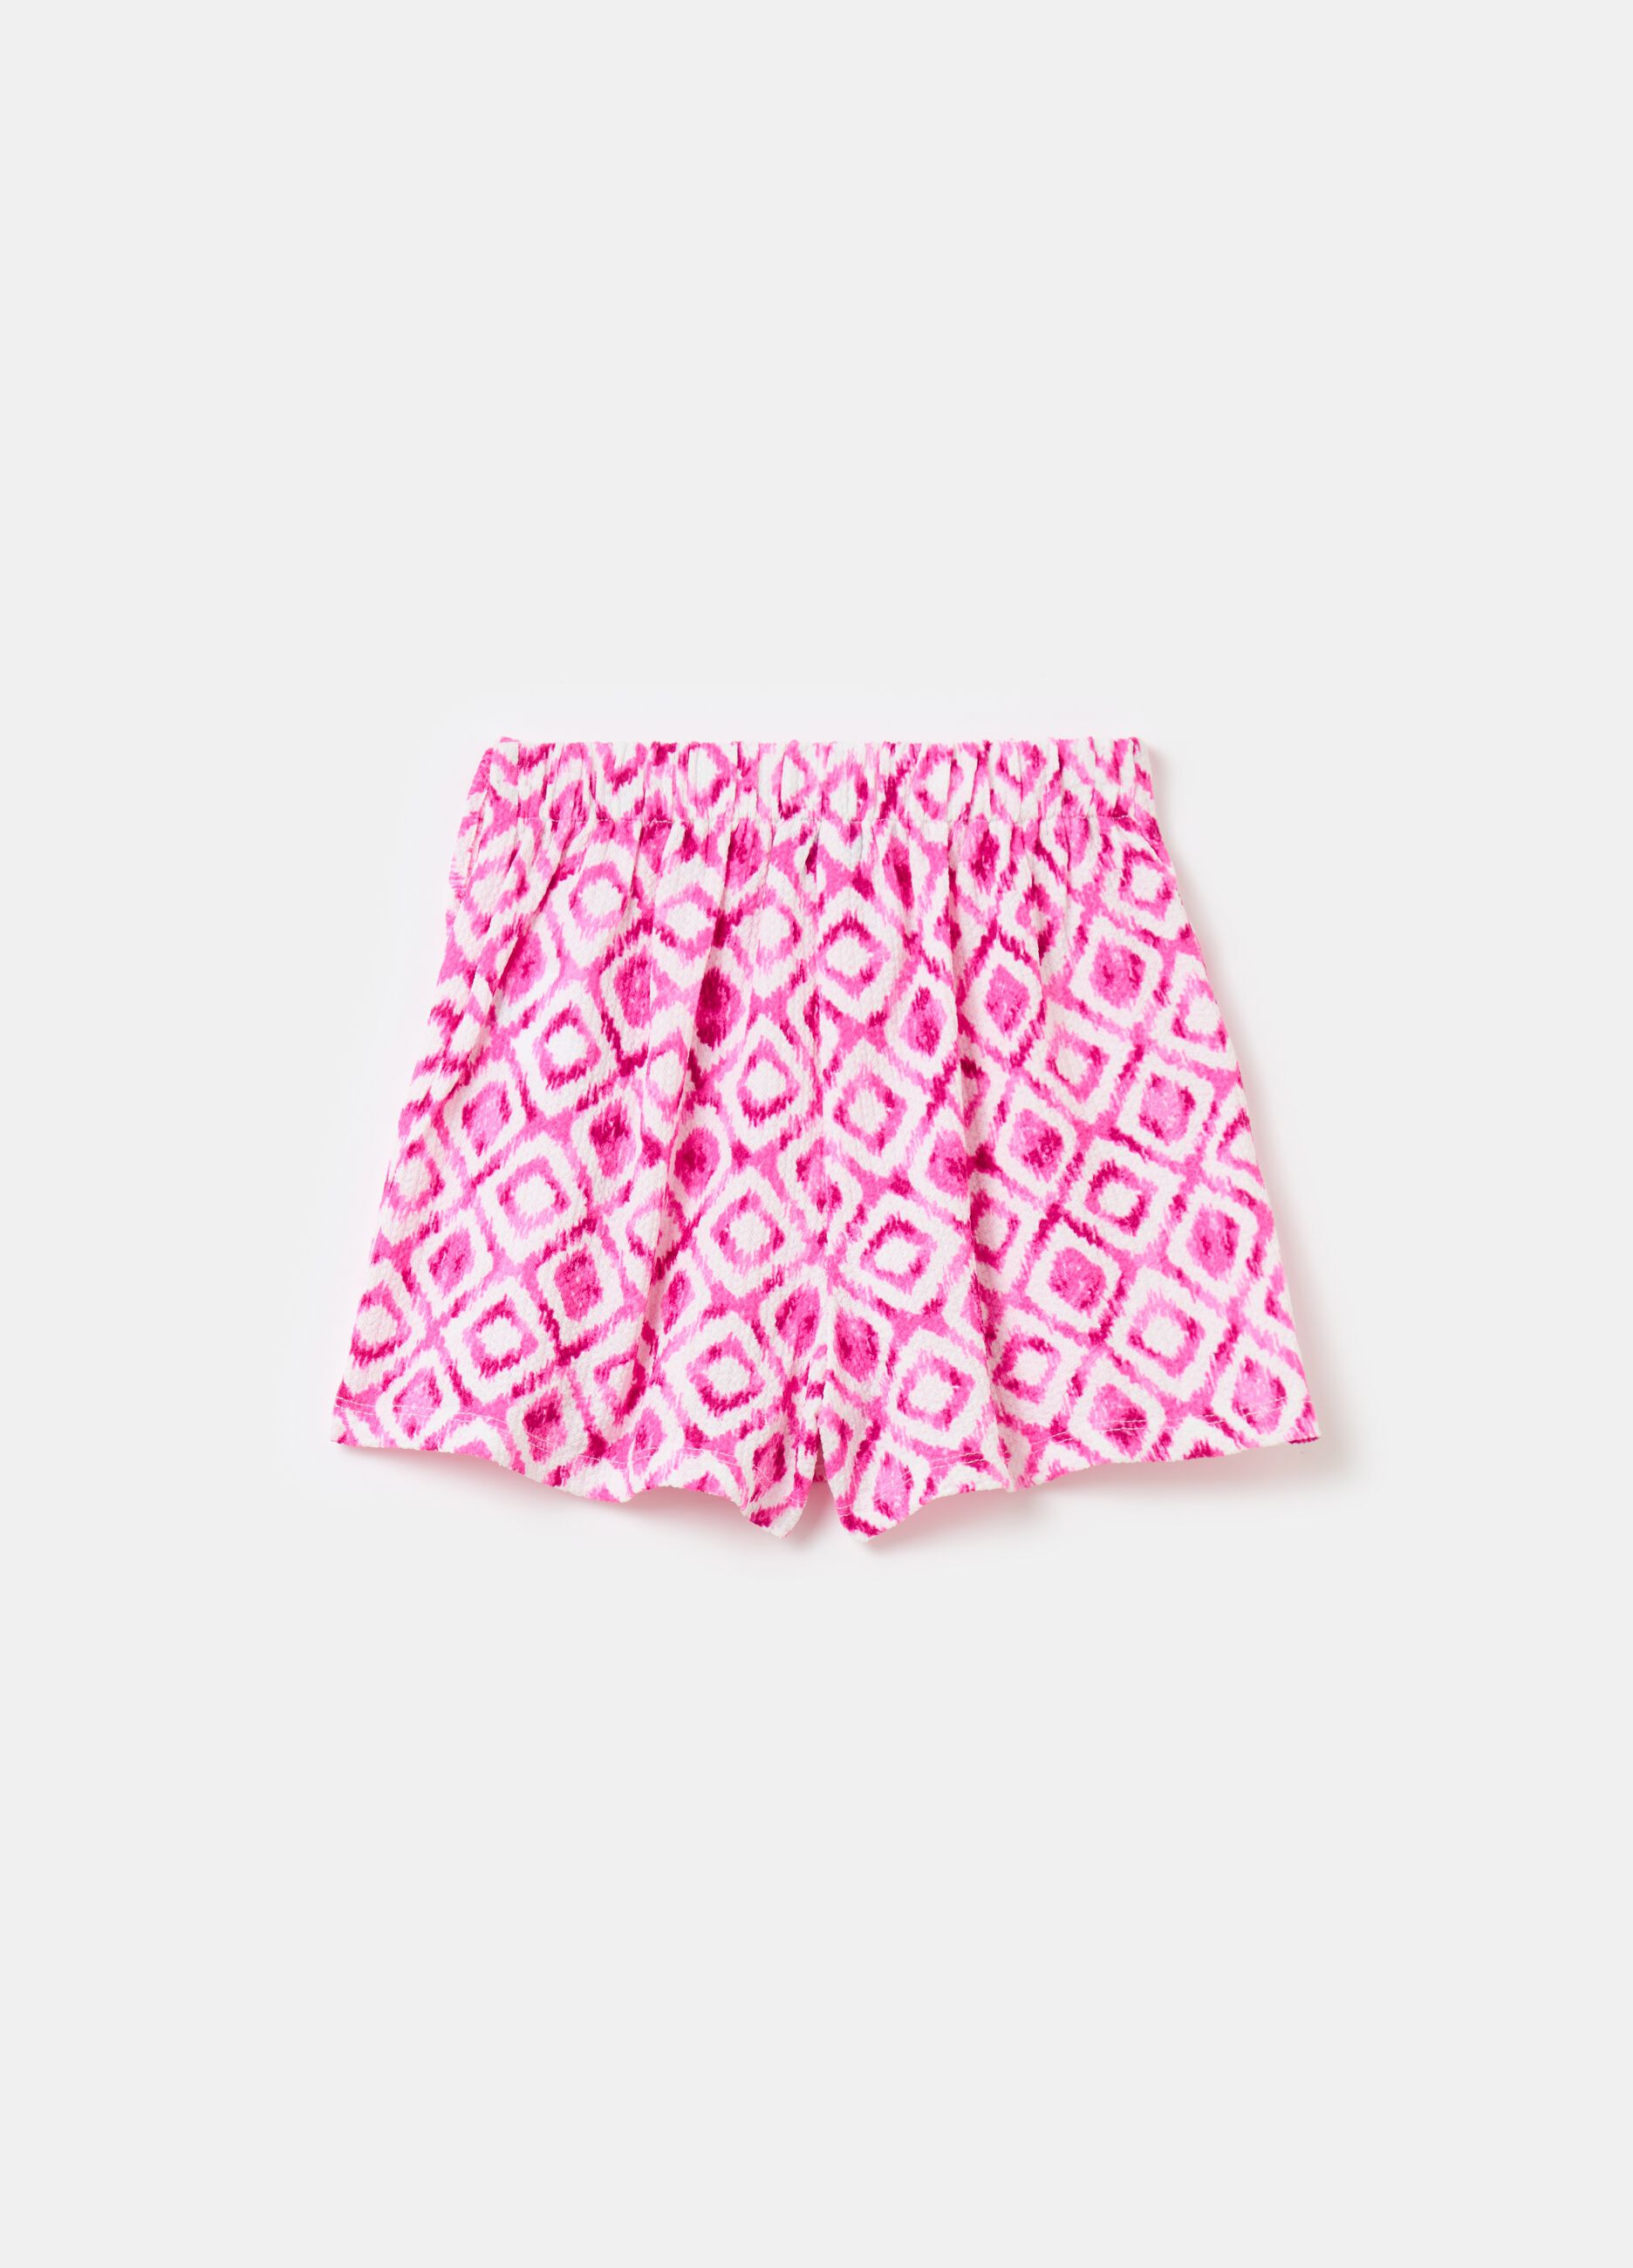 Skort with ikat print and frills